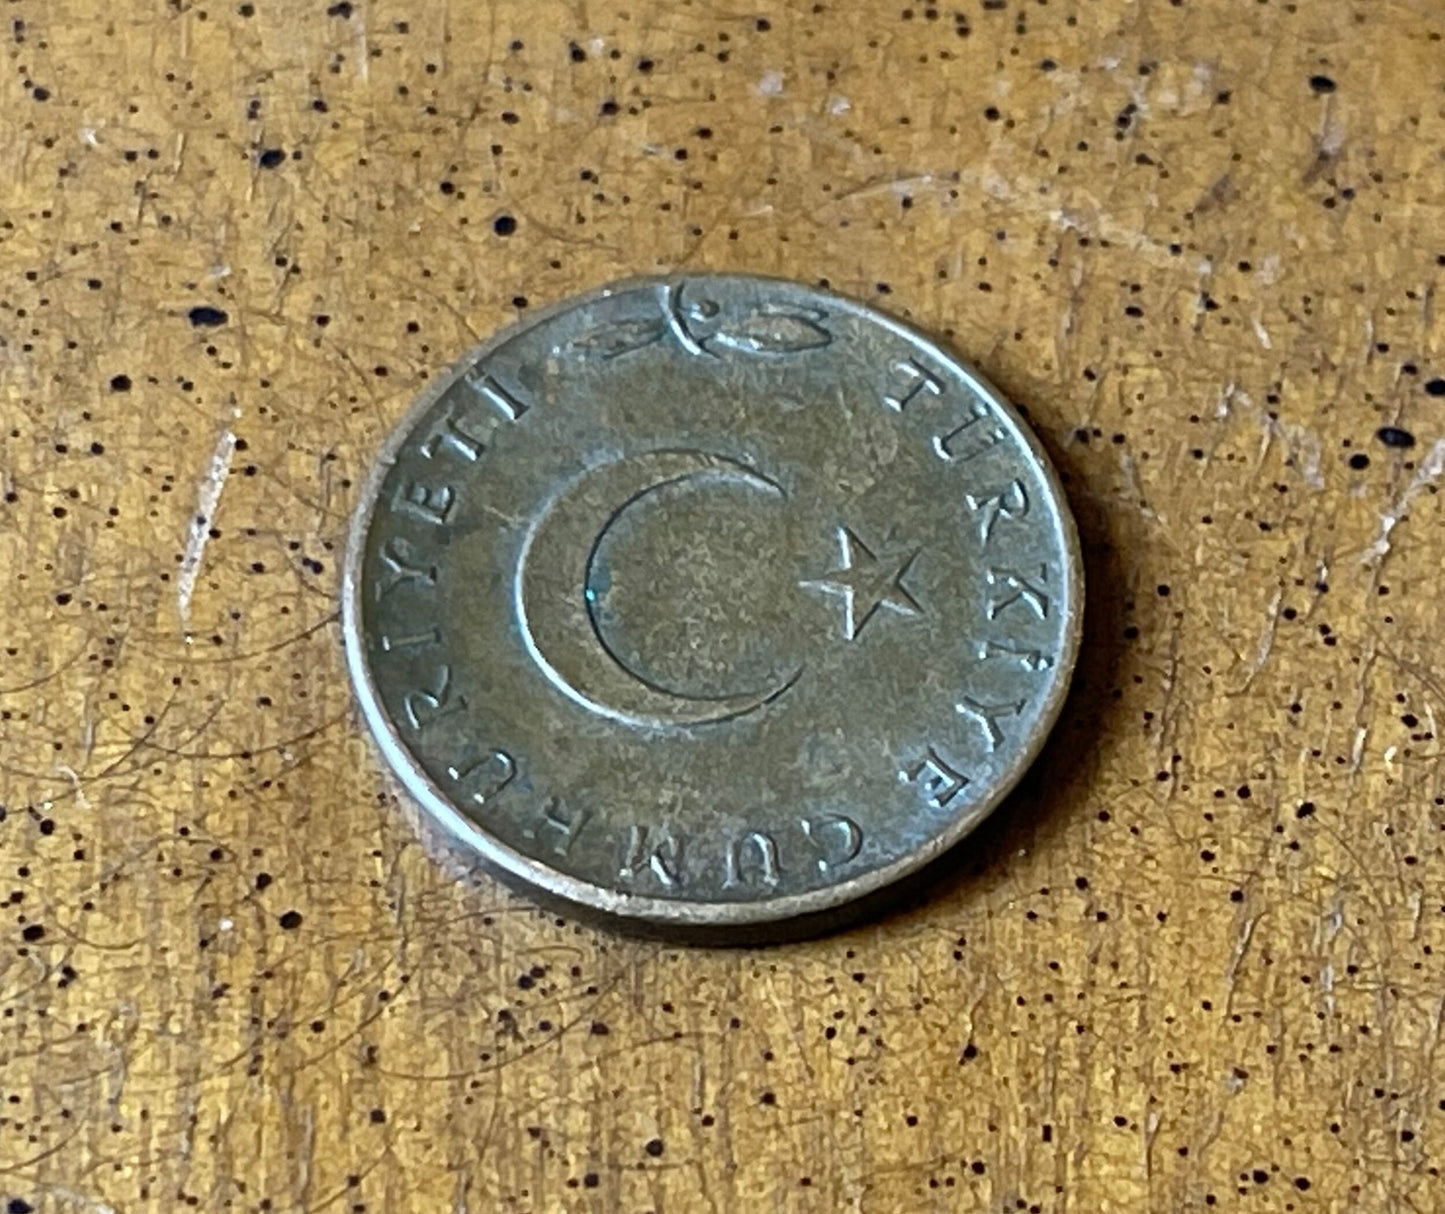 Star and Crescent Islamic Symbol Turkey 5 Kurus Oak Branch Authentic Coin Money for Jewelry and Craft Making